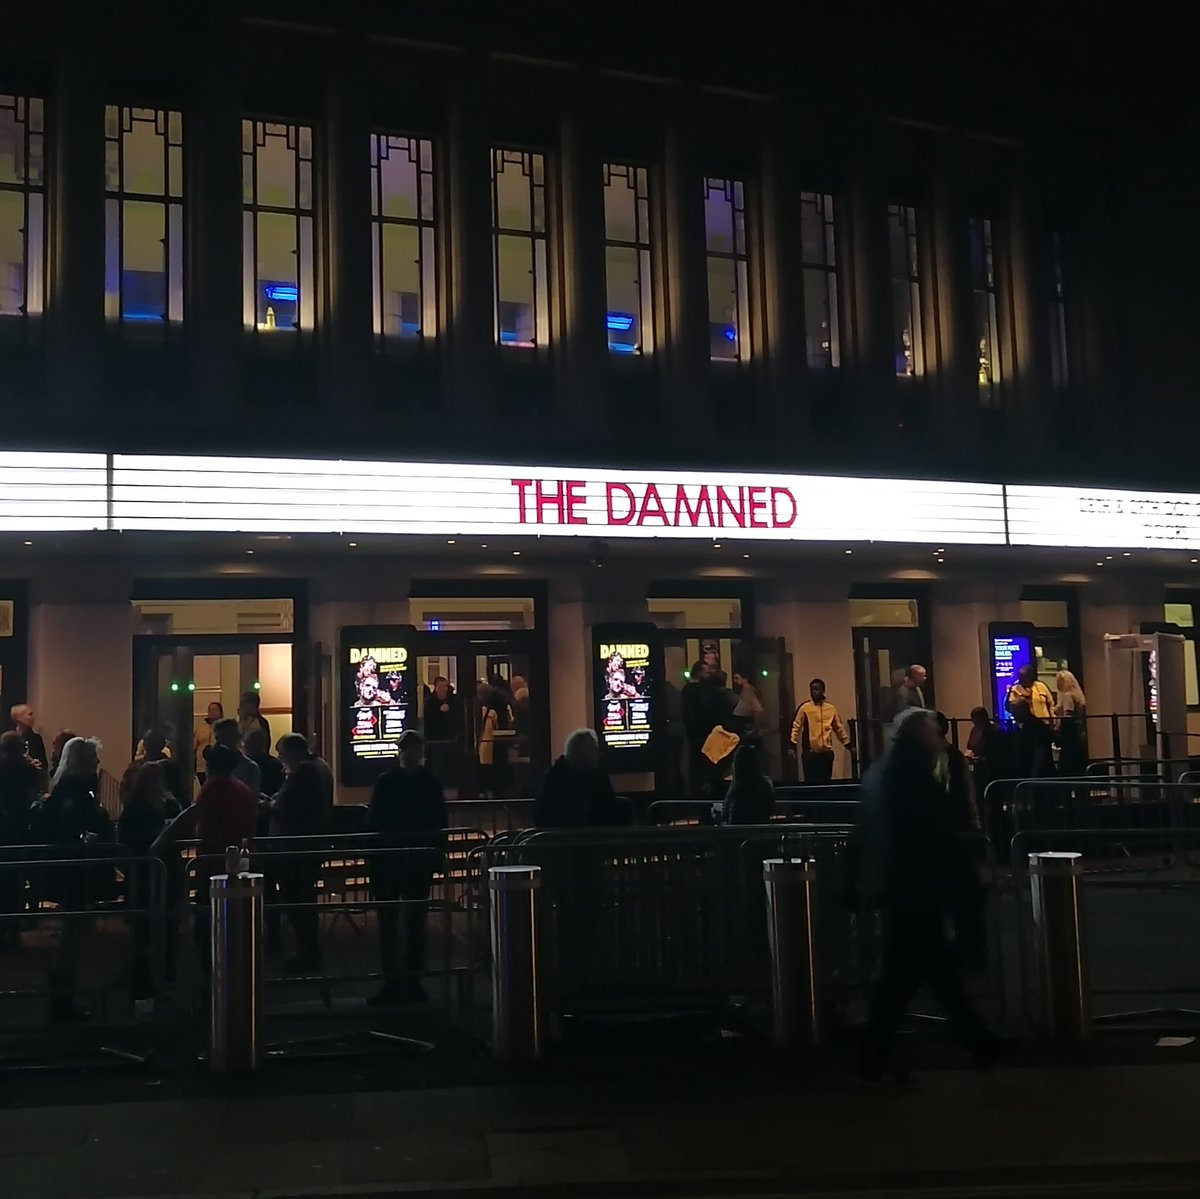 The Damned!